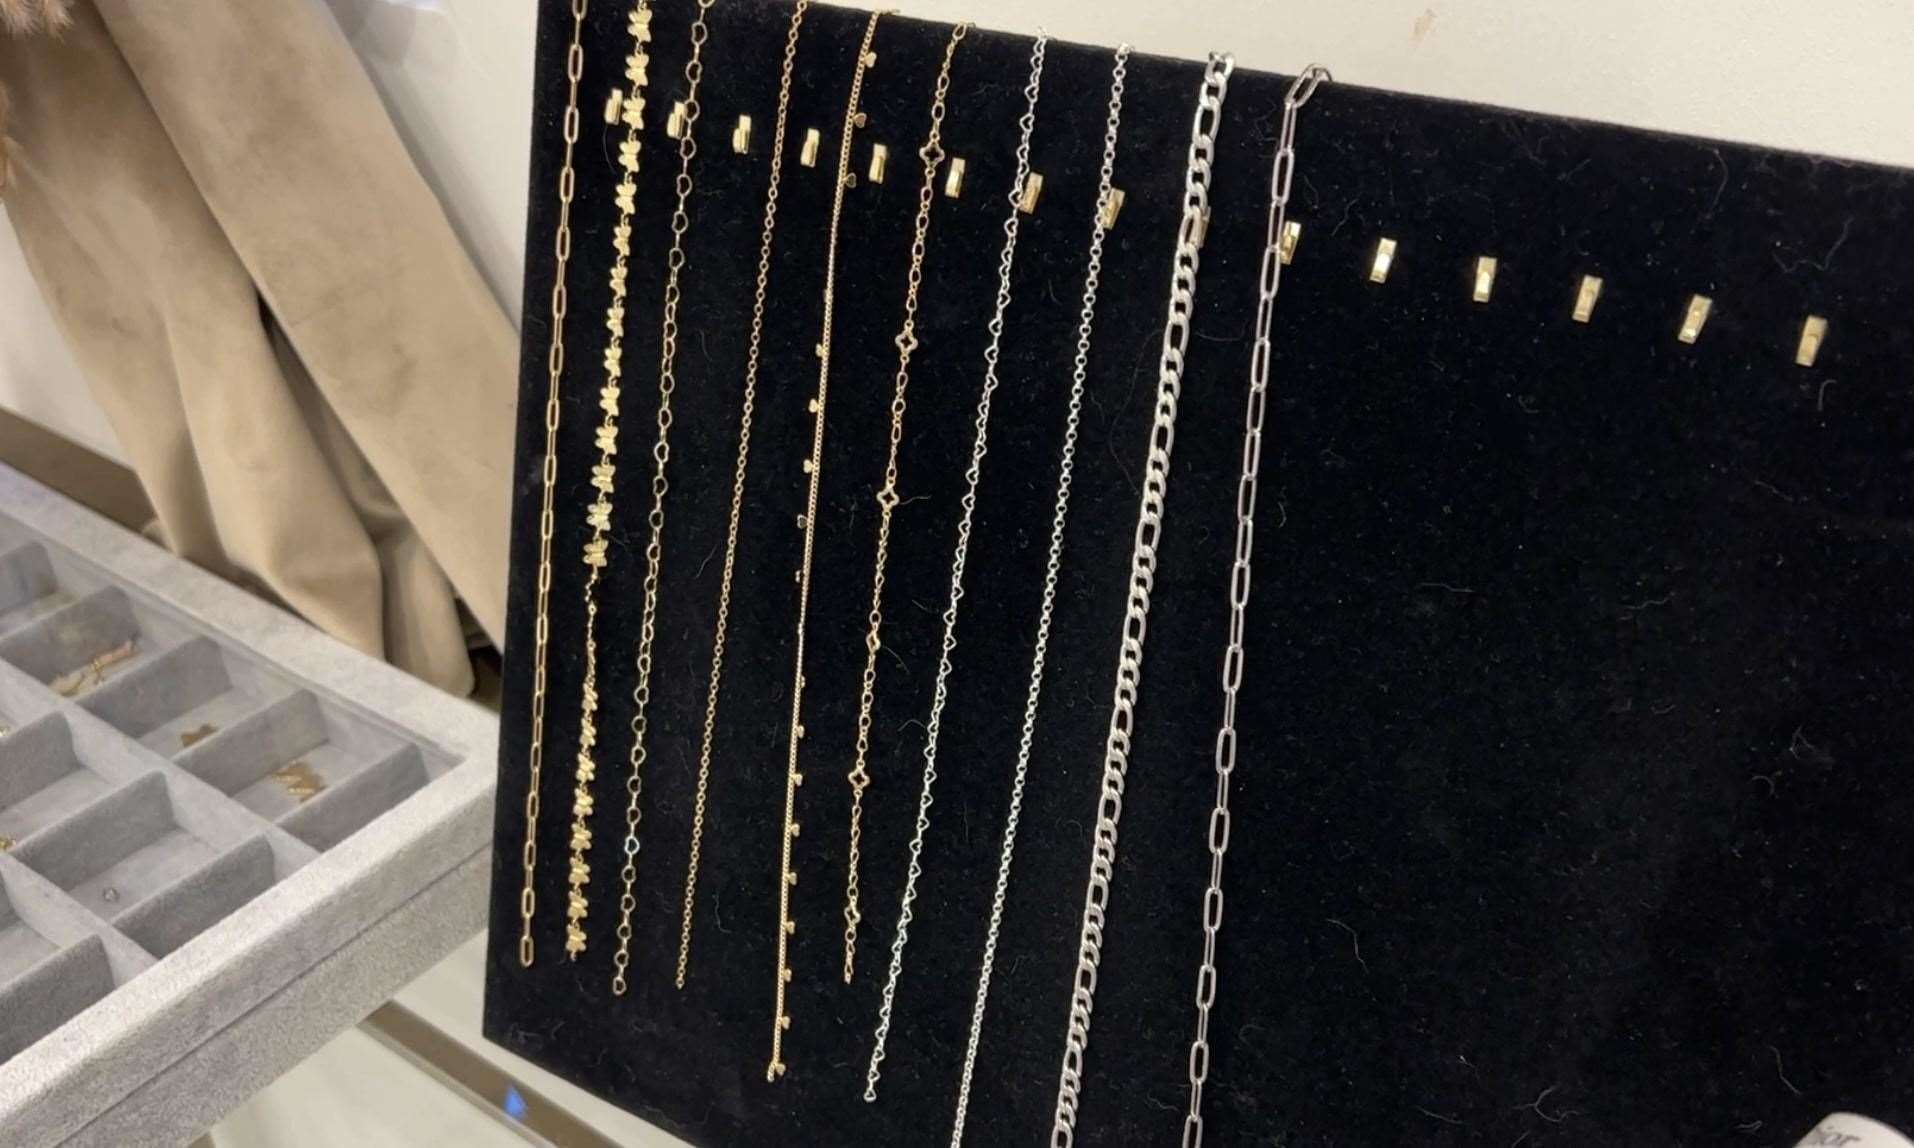 The chains offered at RMB Beauty, Northfleet. Picture: Megan Carr